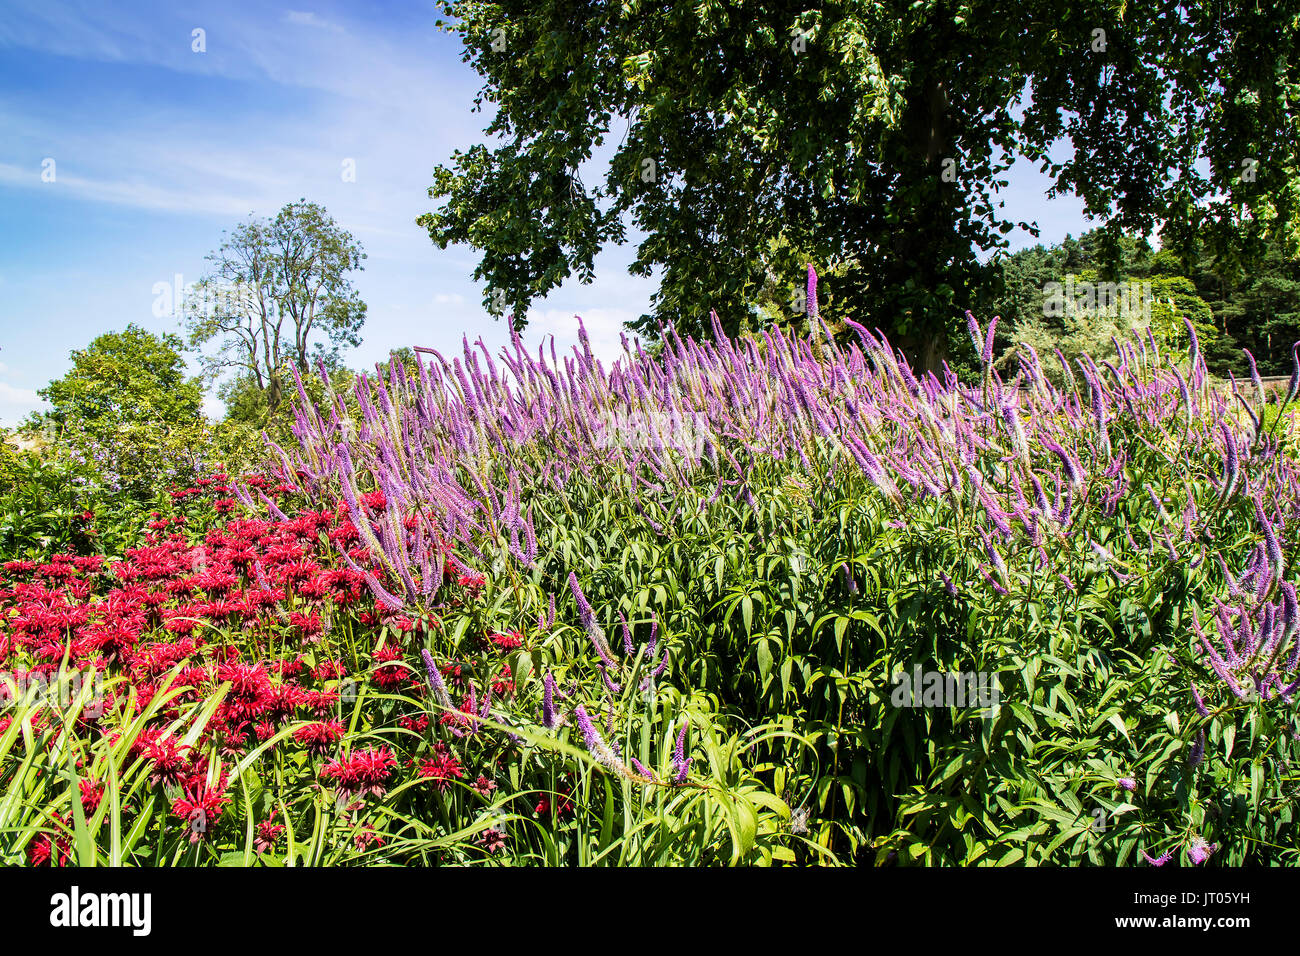 Tall Blue Veronica and Deep Pink Monarda flowering plants in a herbaceous border. Stock Photo